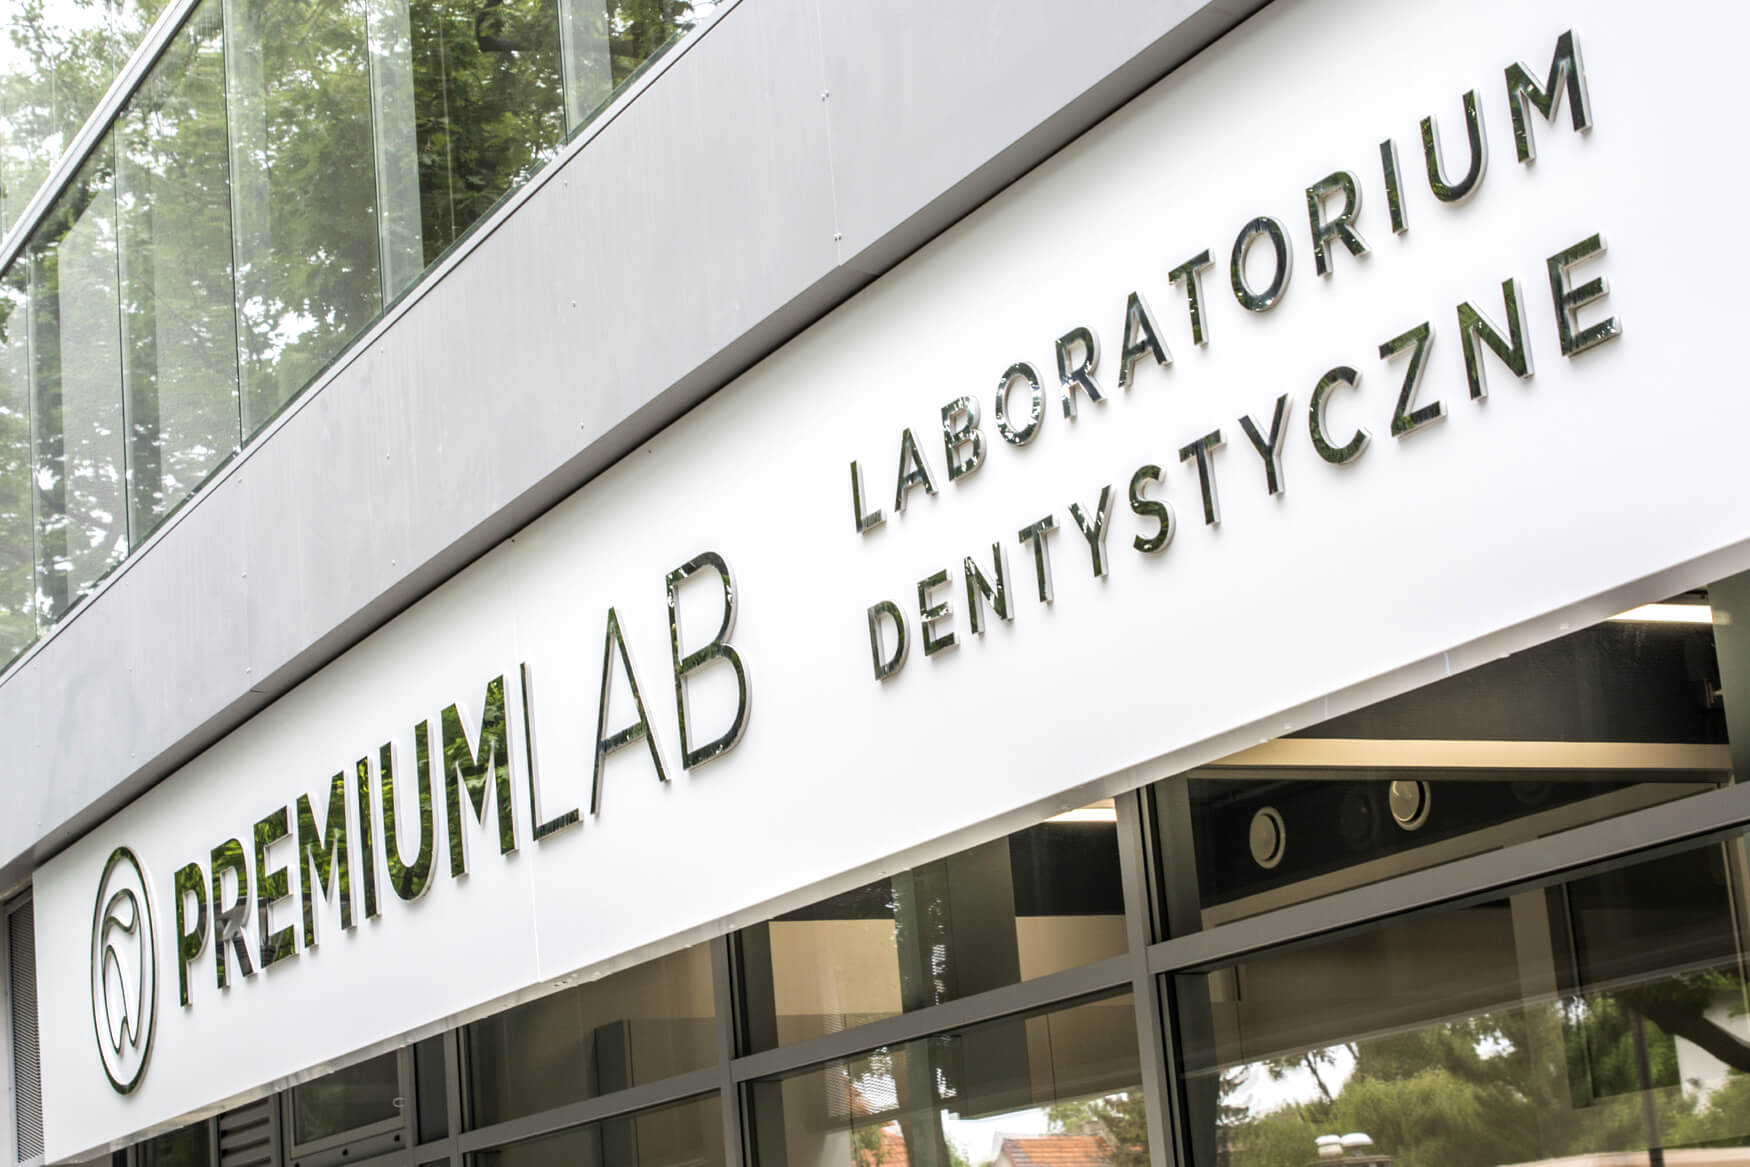 Premiumlab - Premiumlab - company sign placed on an advertising panel with metal spatial letters